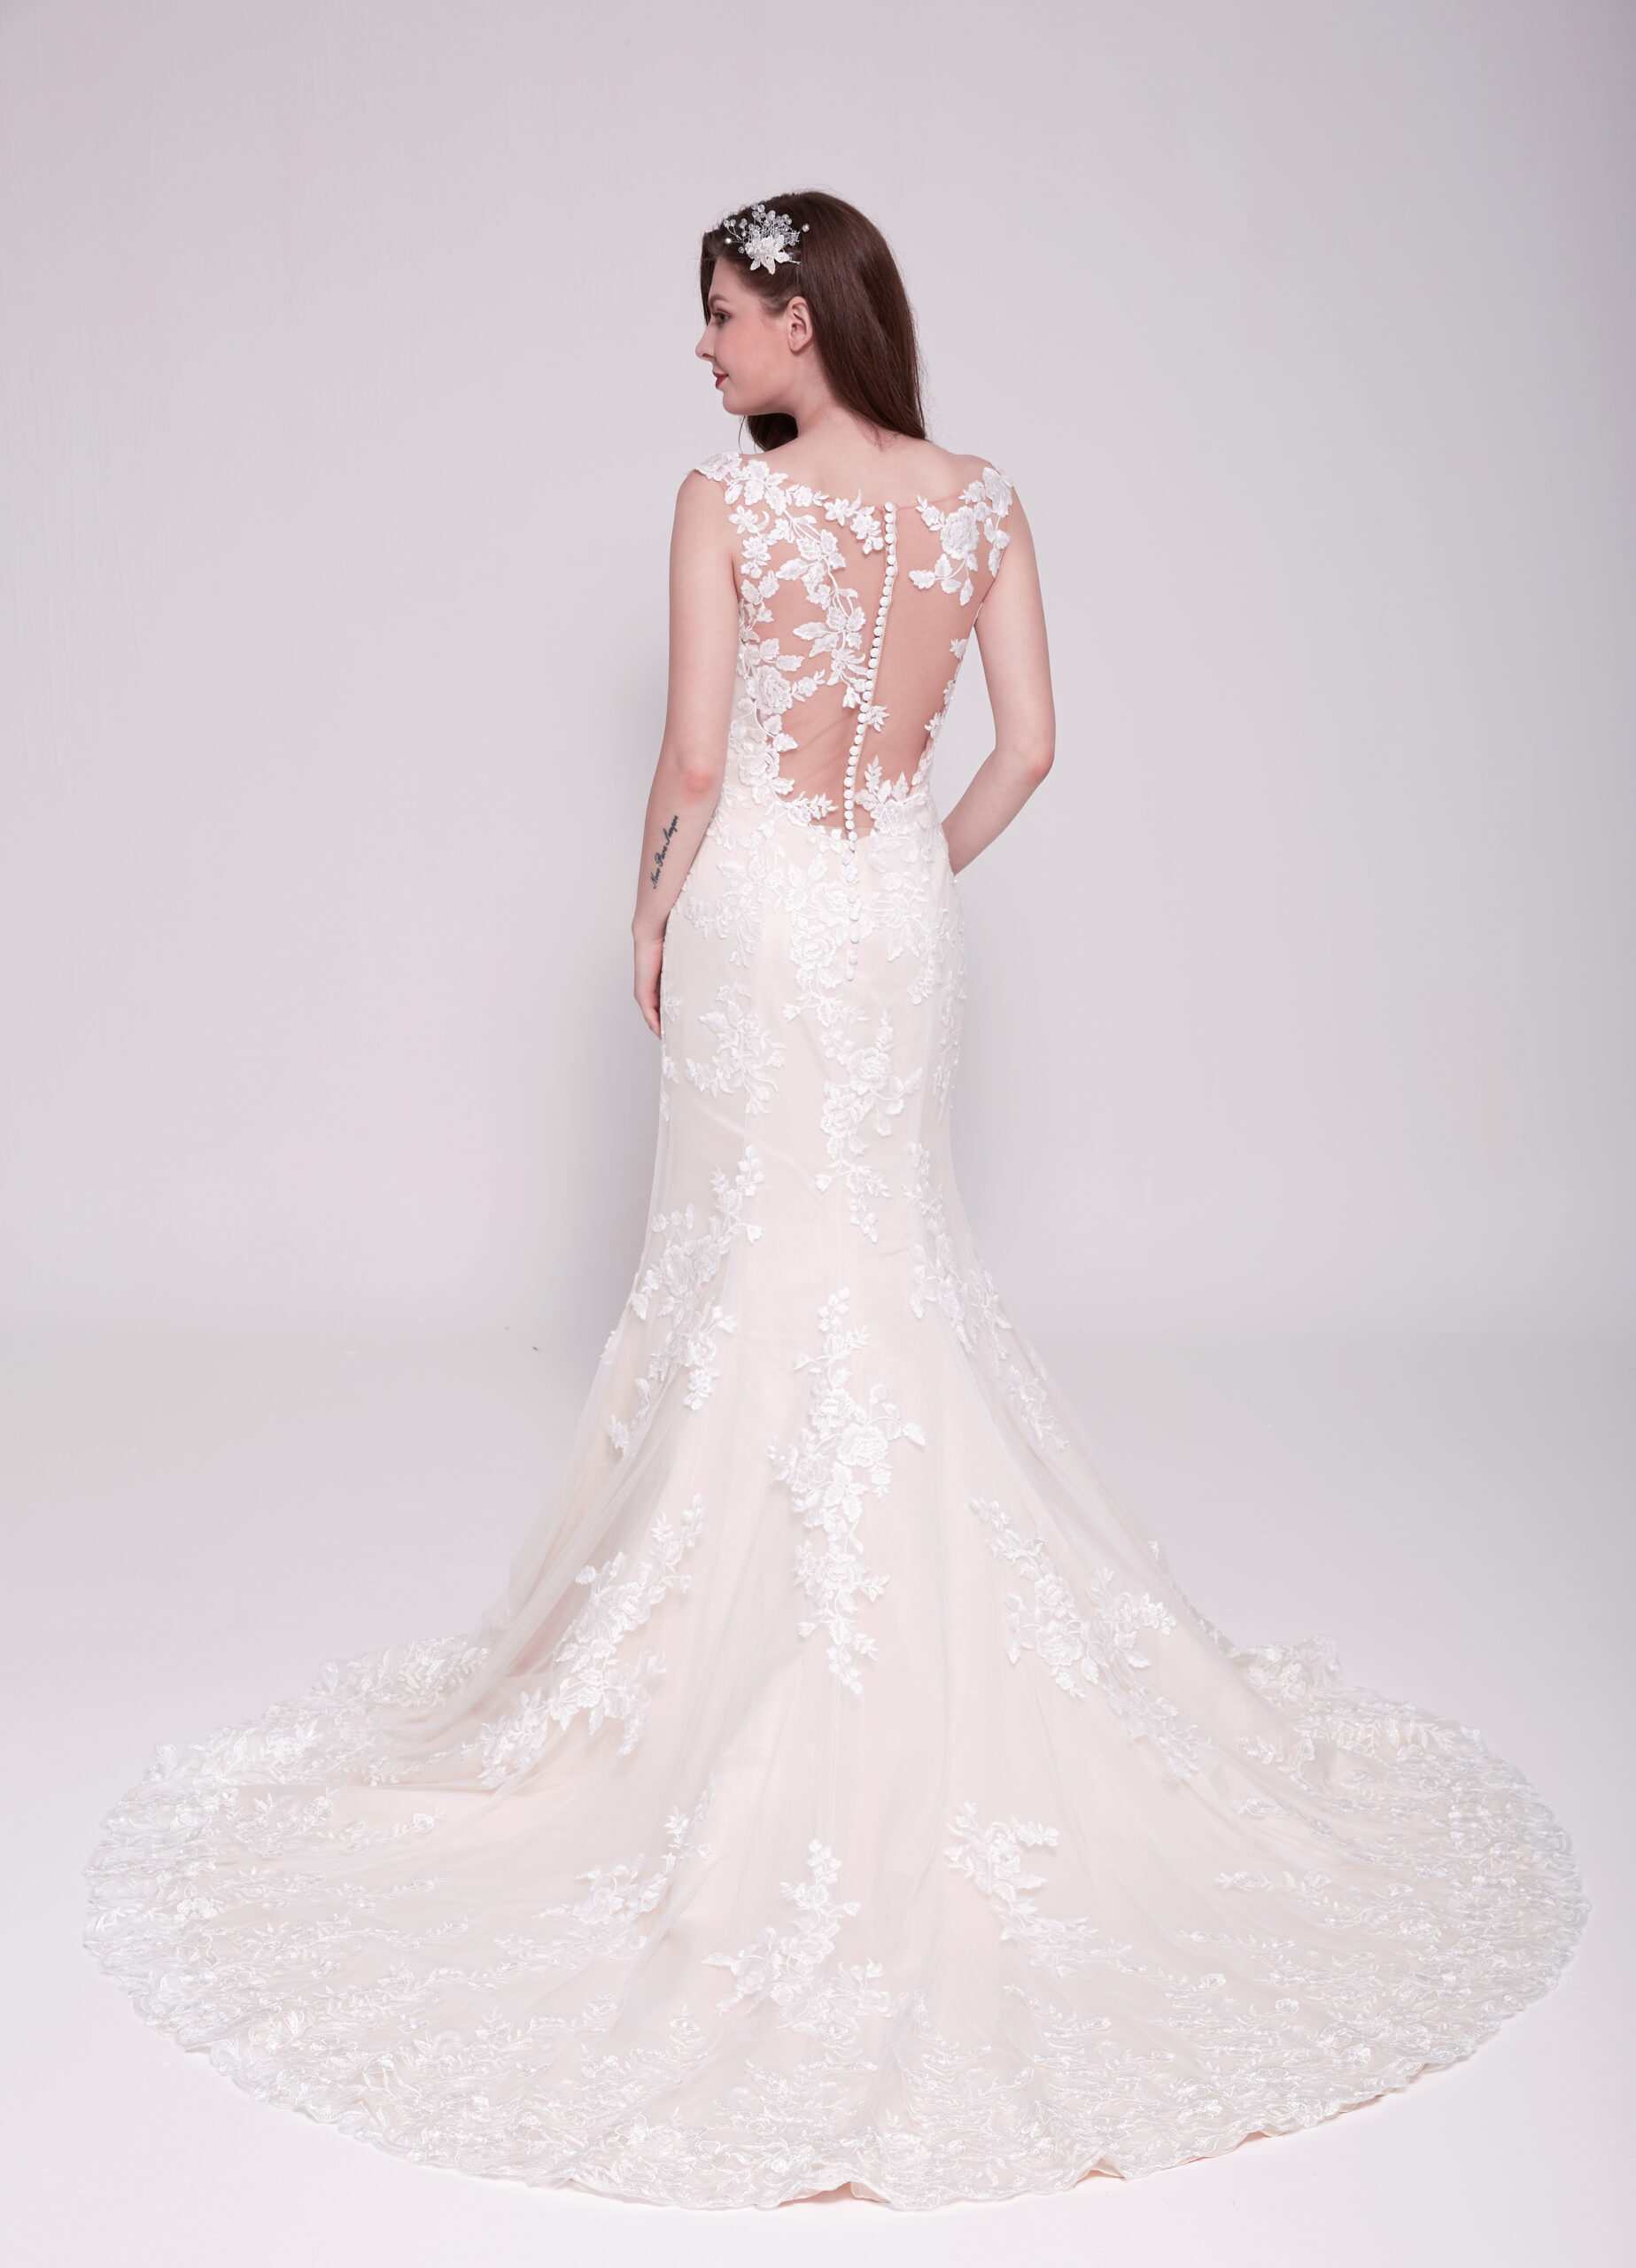 Arlette - A beautiful lace fishtail design | WED4LESS OUTLETS ~ Wedding ...